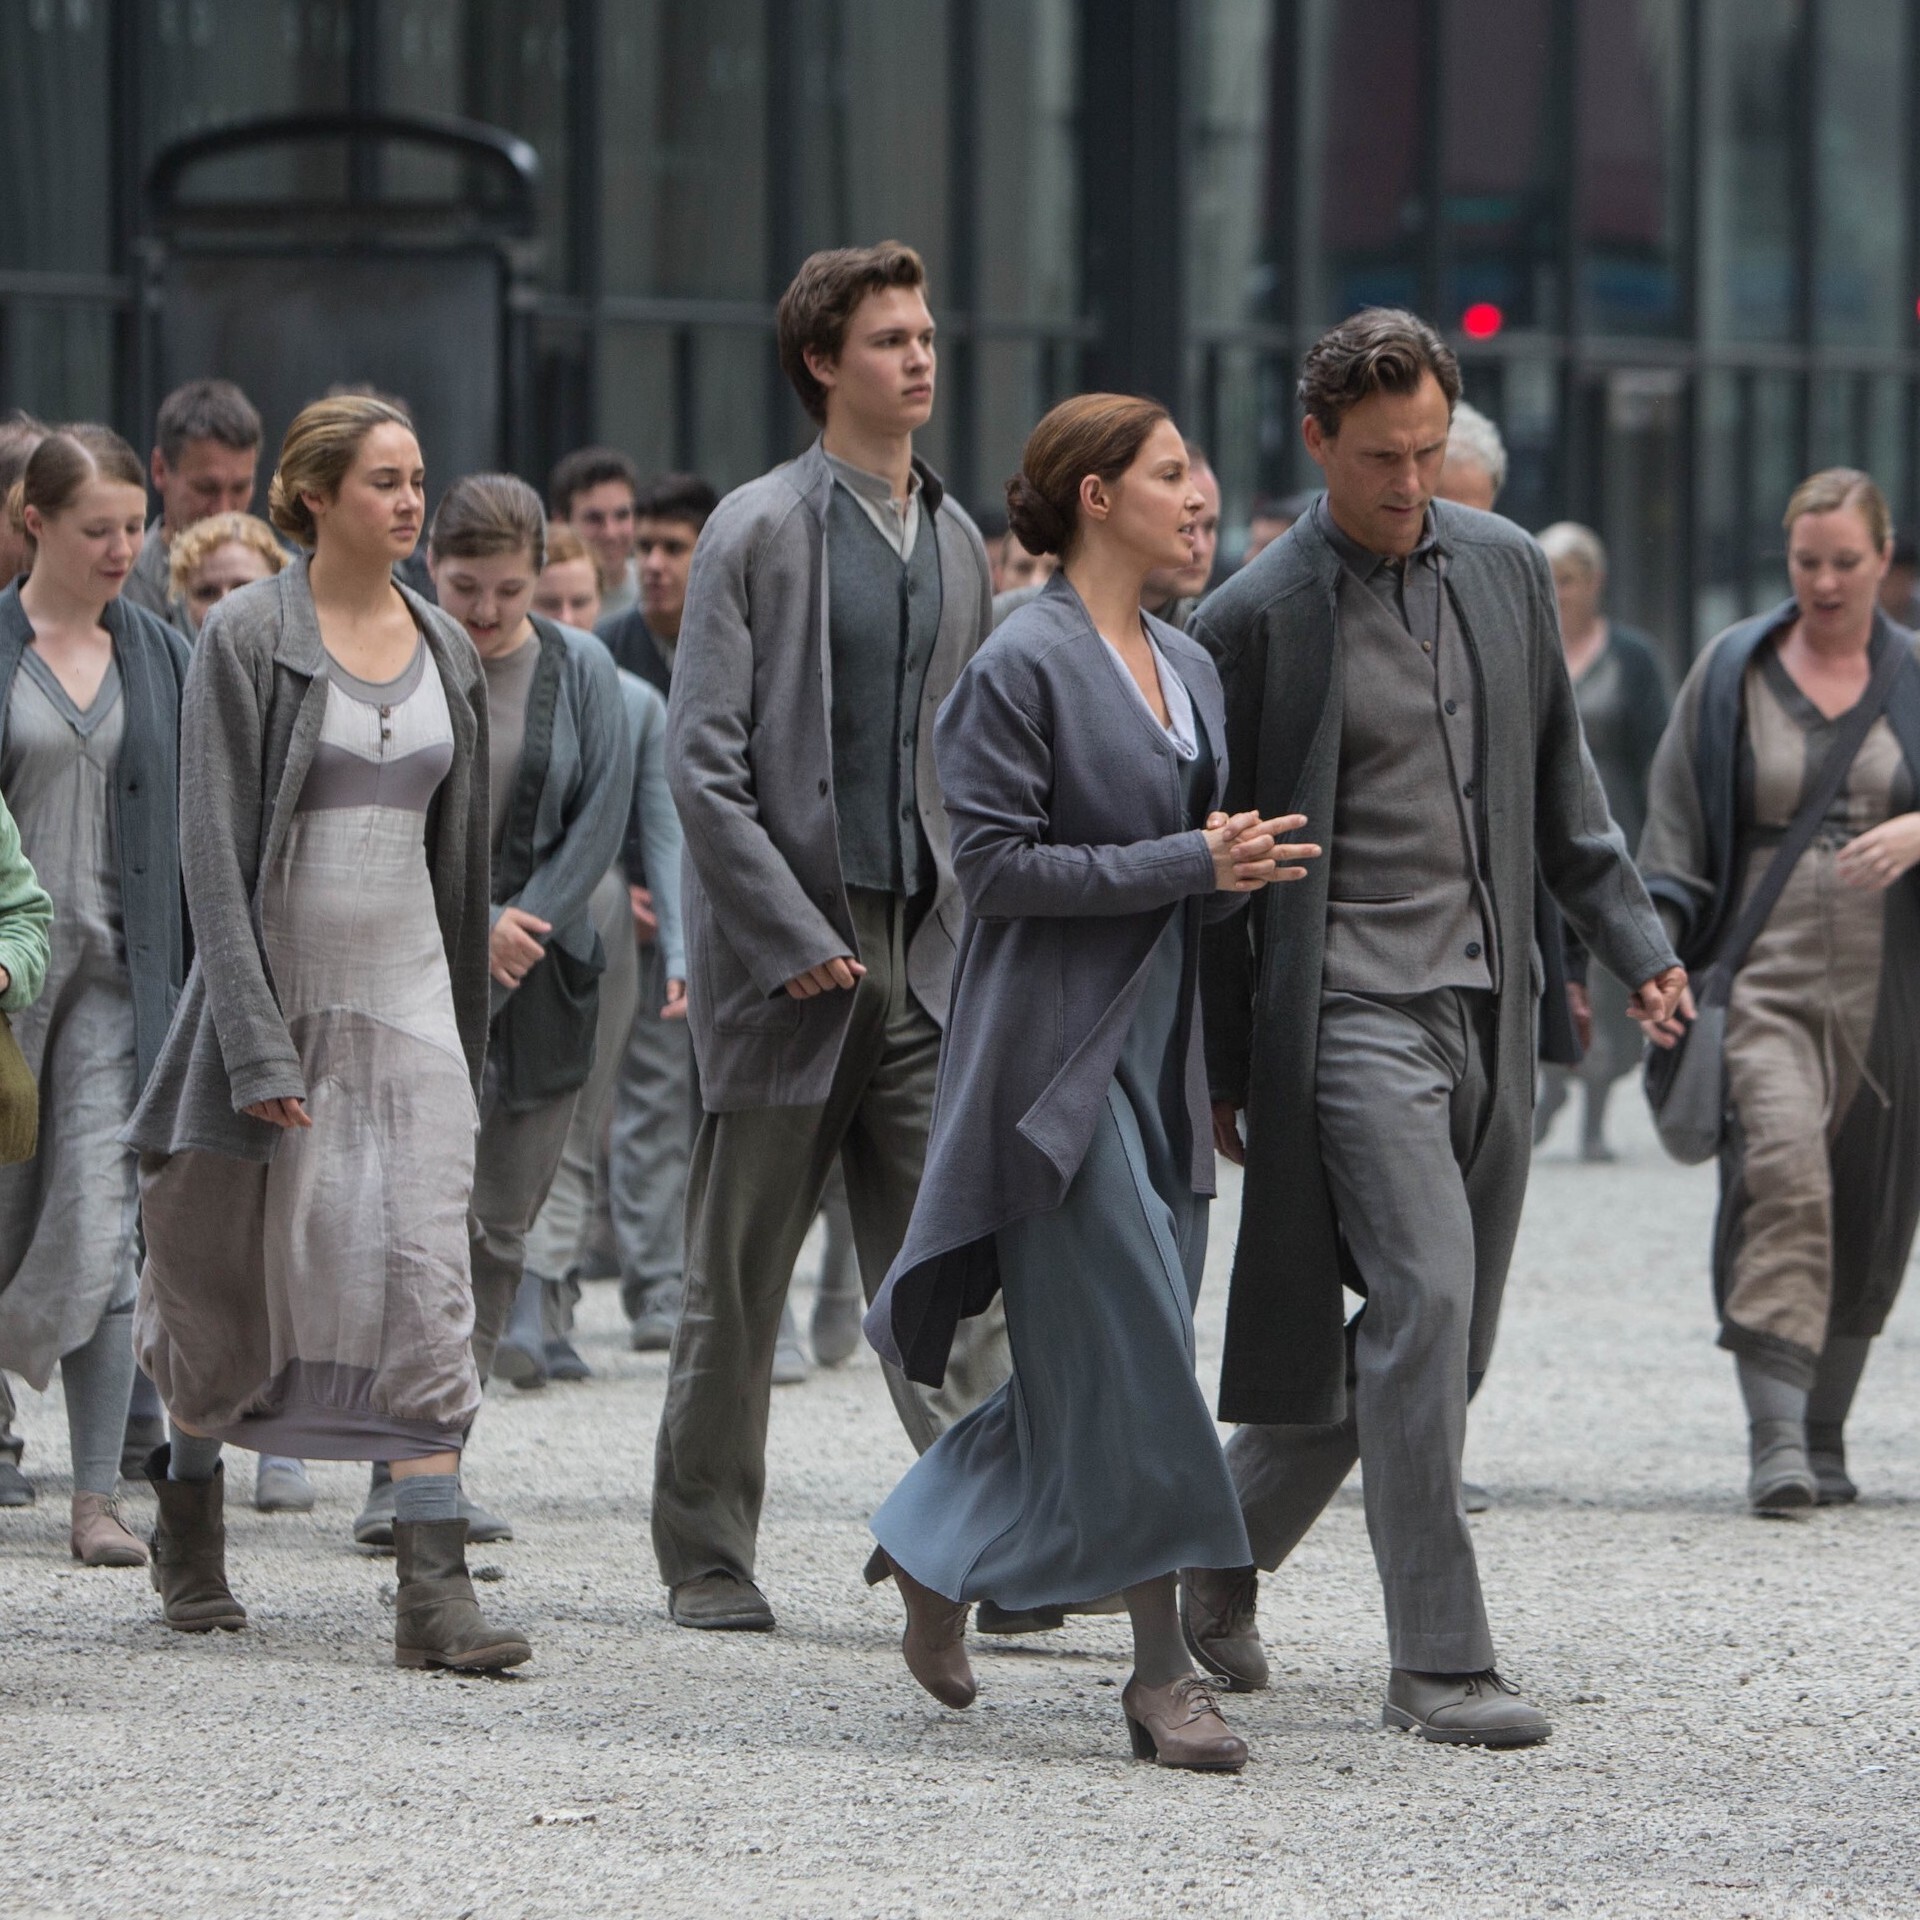 Divergent Candor movie, Powerful symbolism, Moral dilemmas, Finding one's purpose, 1920x1920 HD Phone